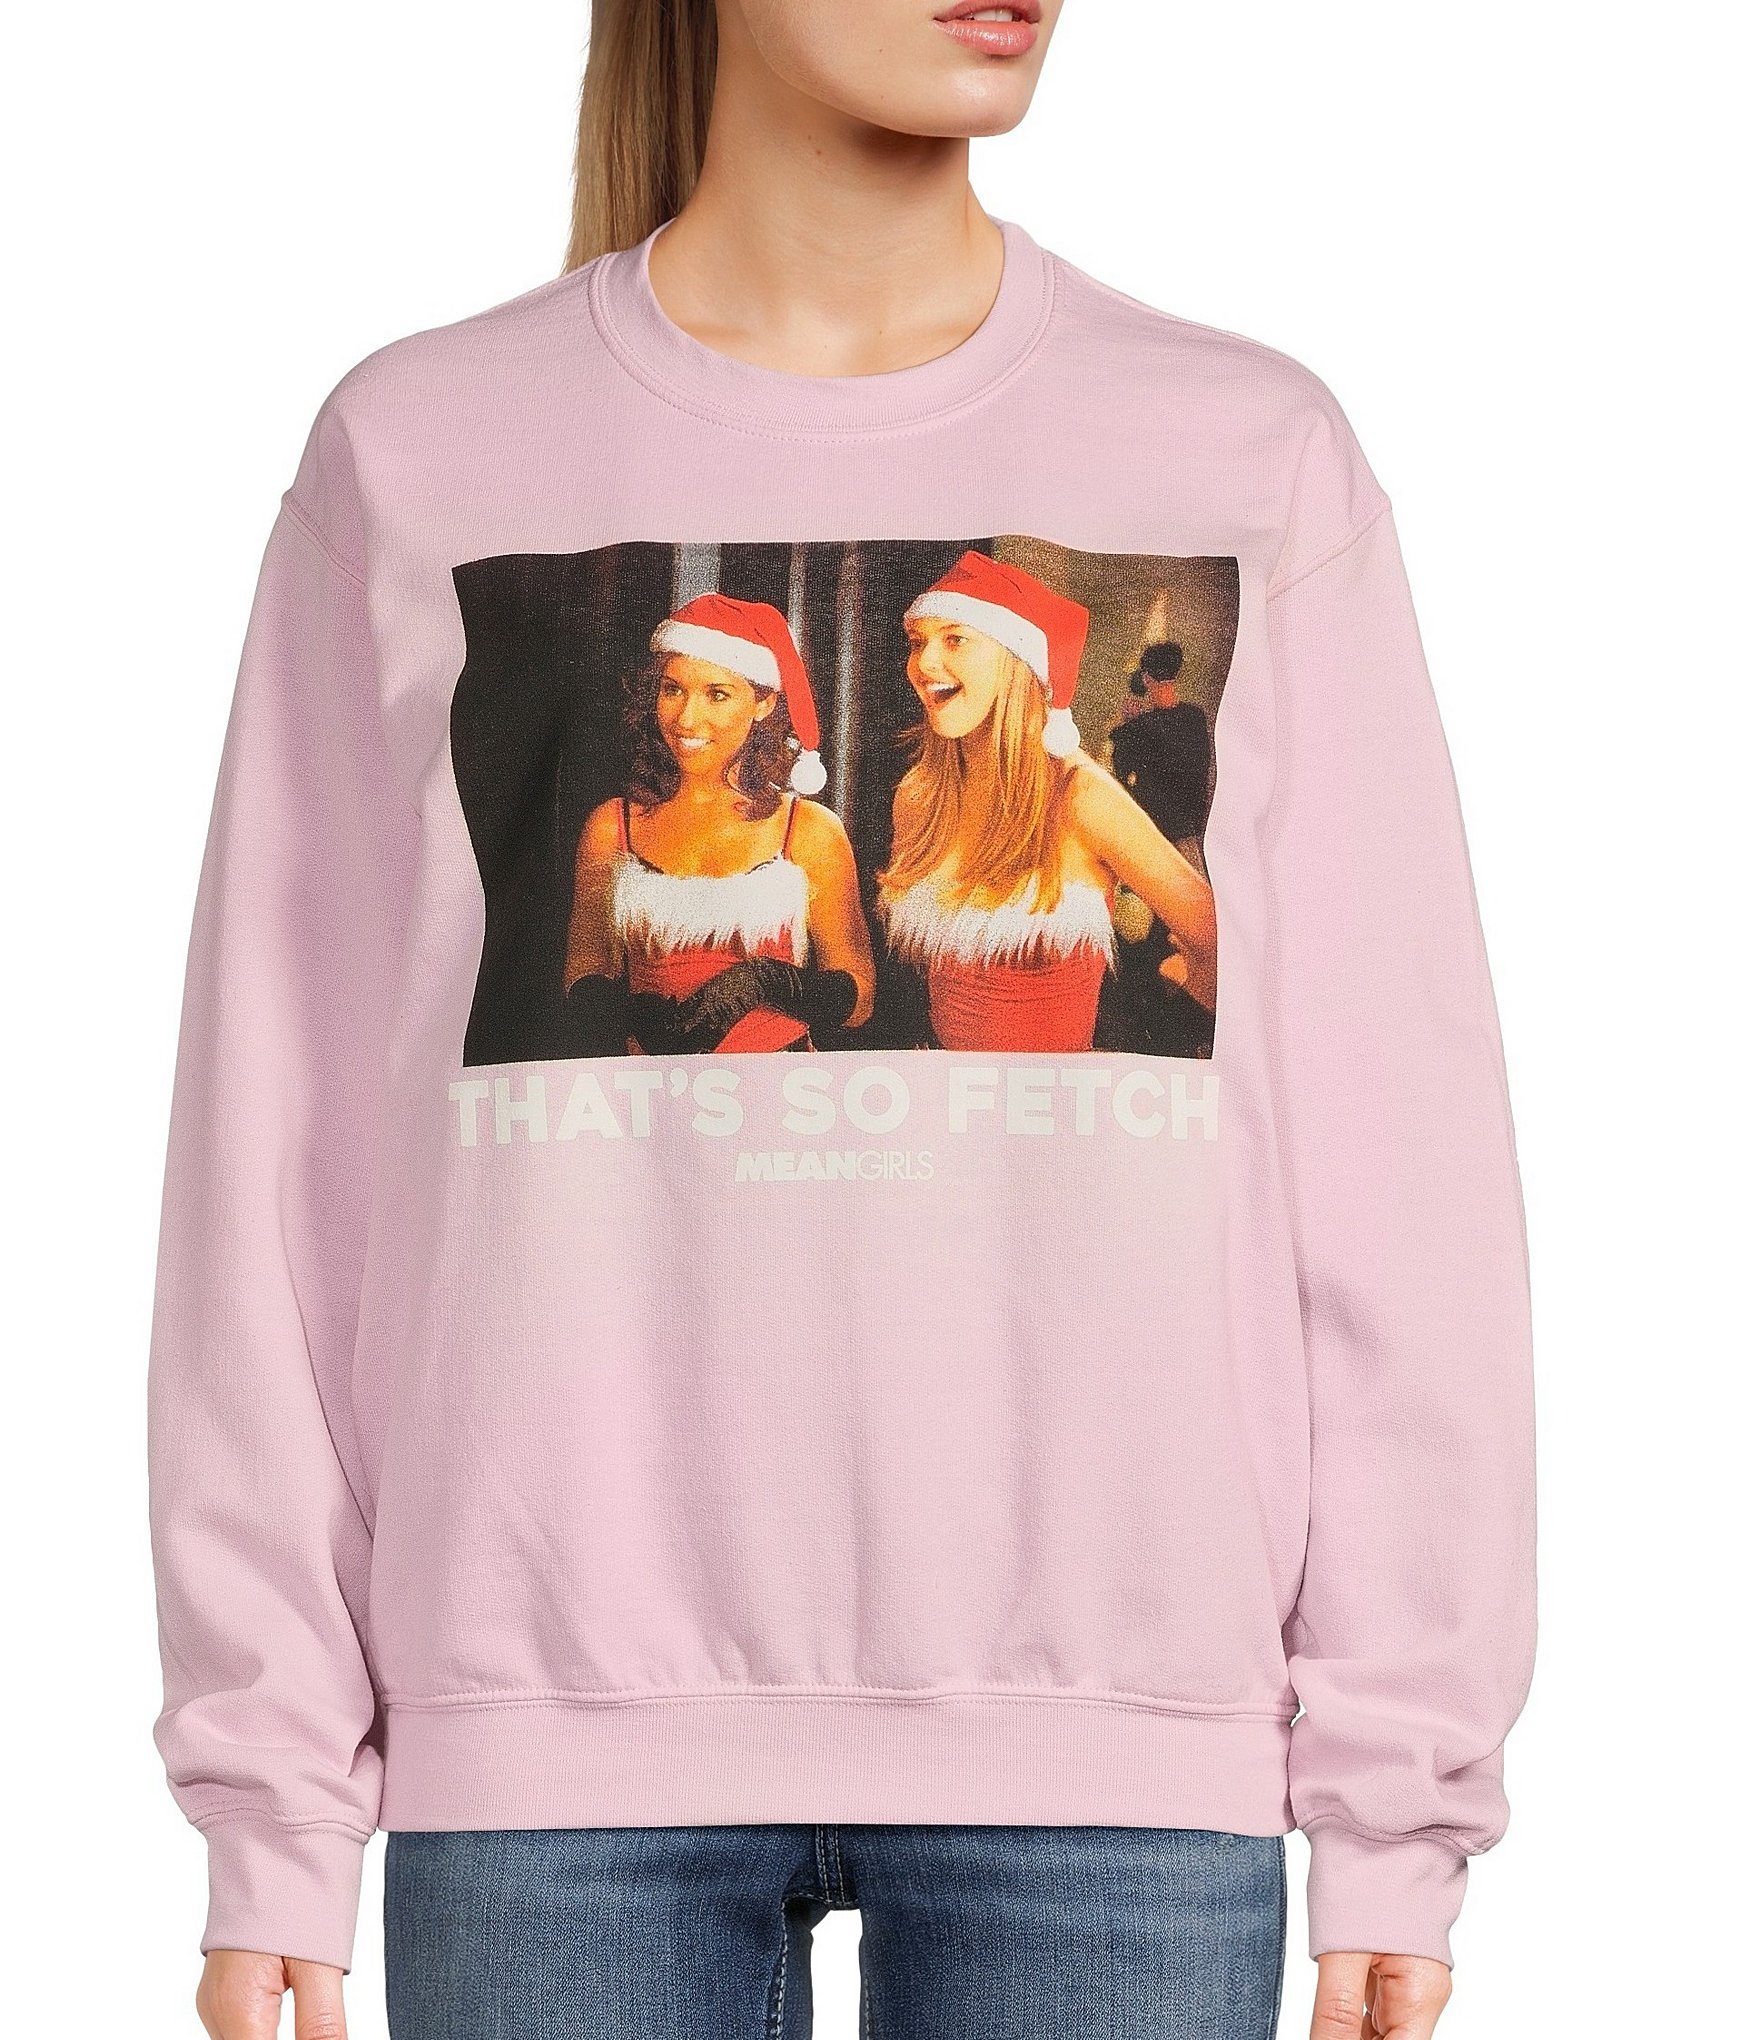 Mean Girl Pullovers